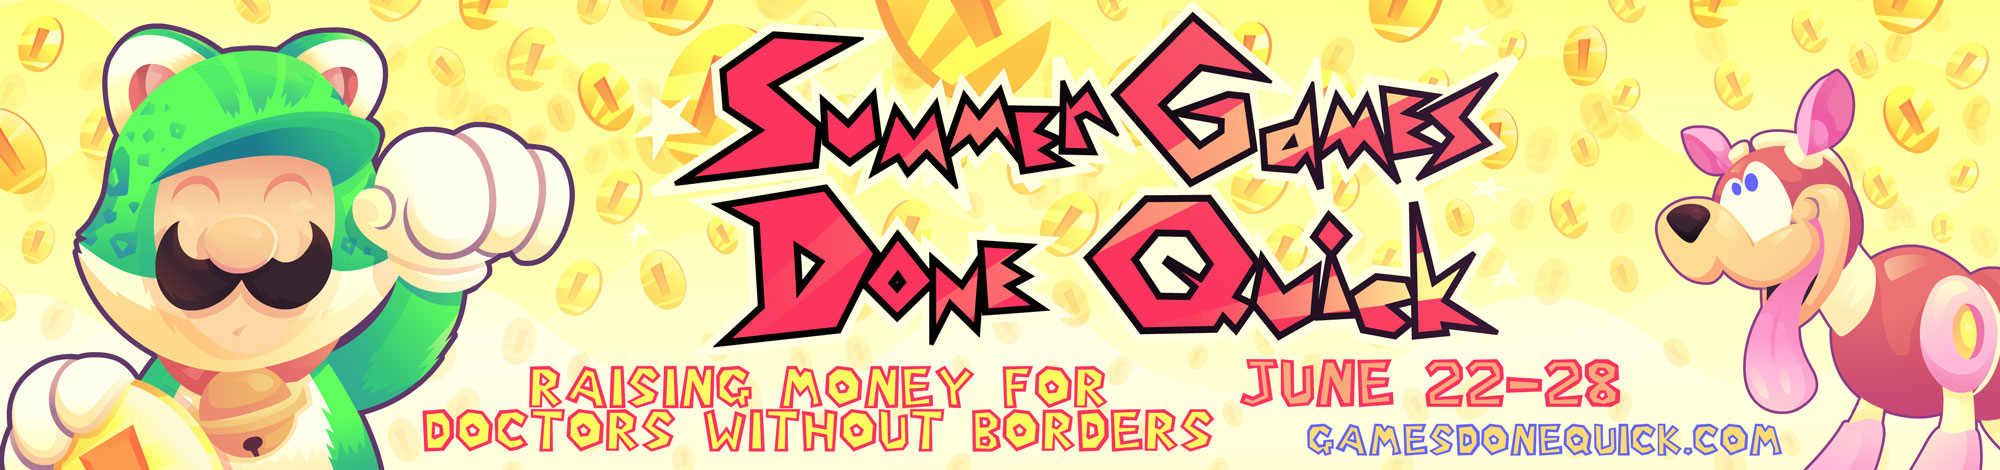 Summer Games Done Quick ends raising $700,000 for charity